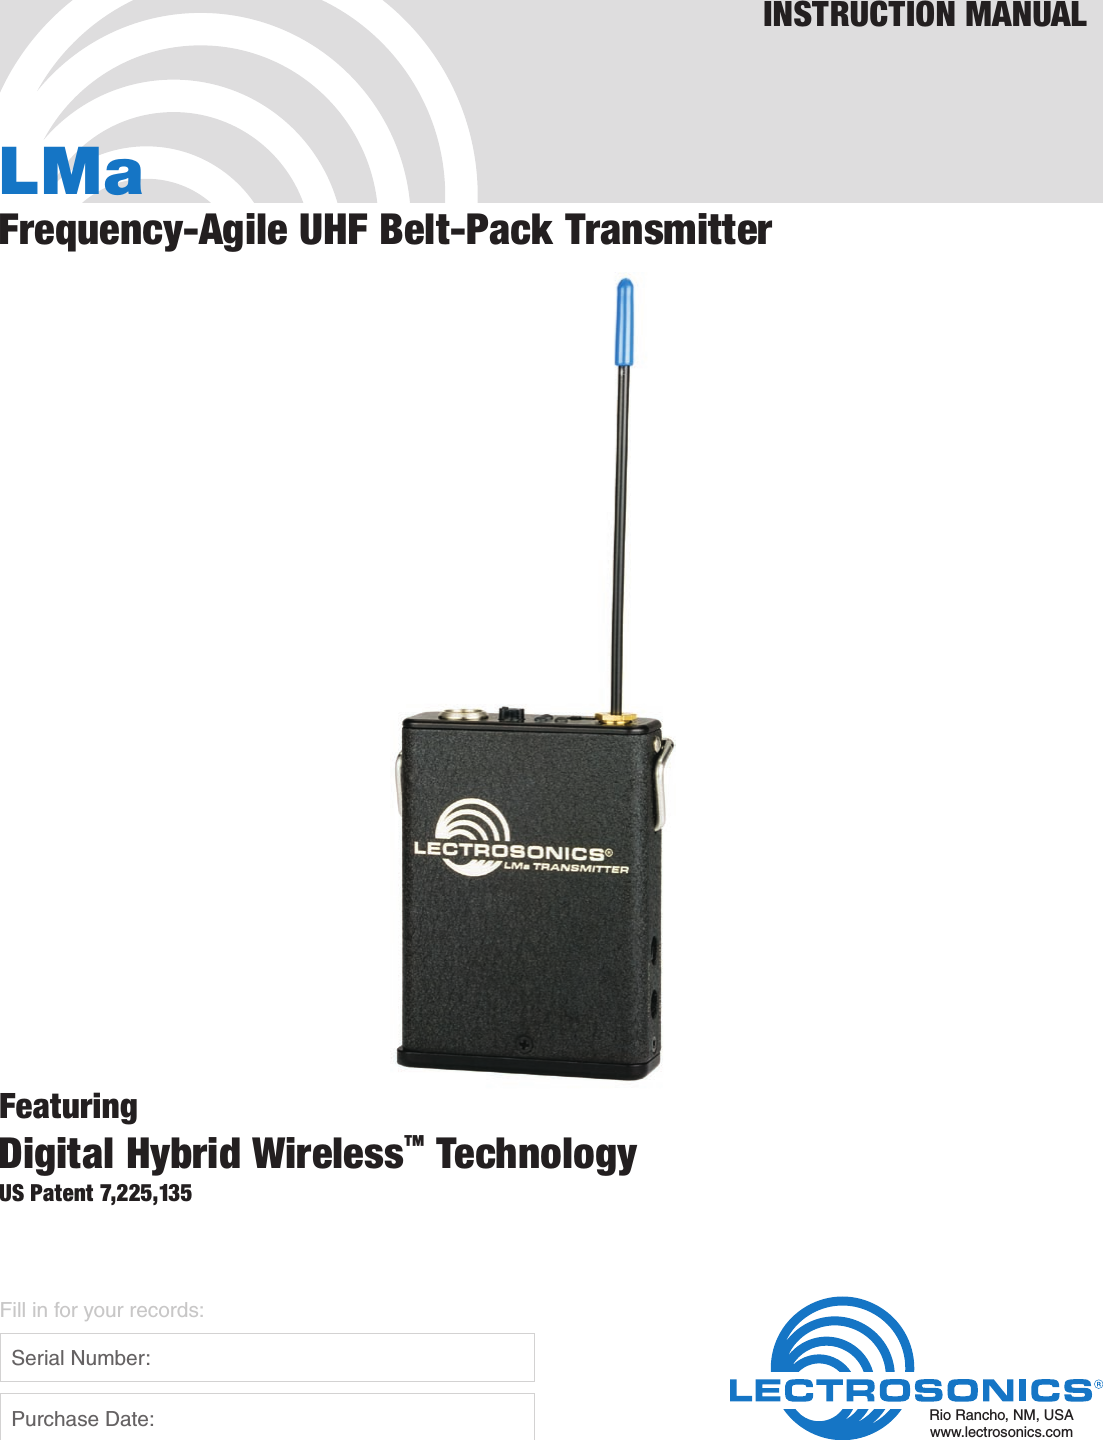 LMaFrequency-Agile UHF Belt-Pack TransmitterFeaturingDigital Hybrid Wireless™ TechnologyUS Patent 7,225,135INSTRUCTION MANUALRio Rancho, NM, USAwww.lectrosonics.comFill in for your records:  Serial Number:  Purchase Date: